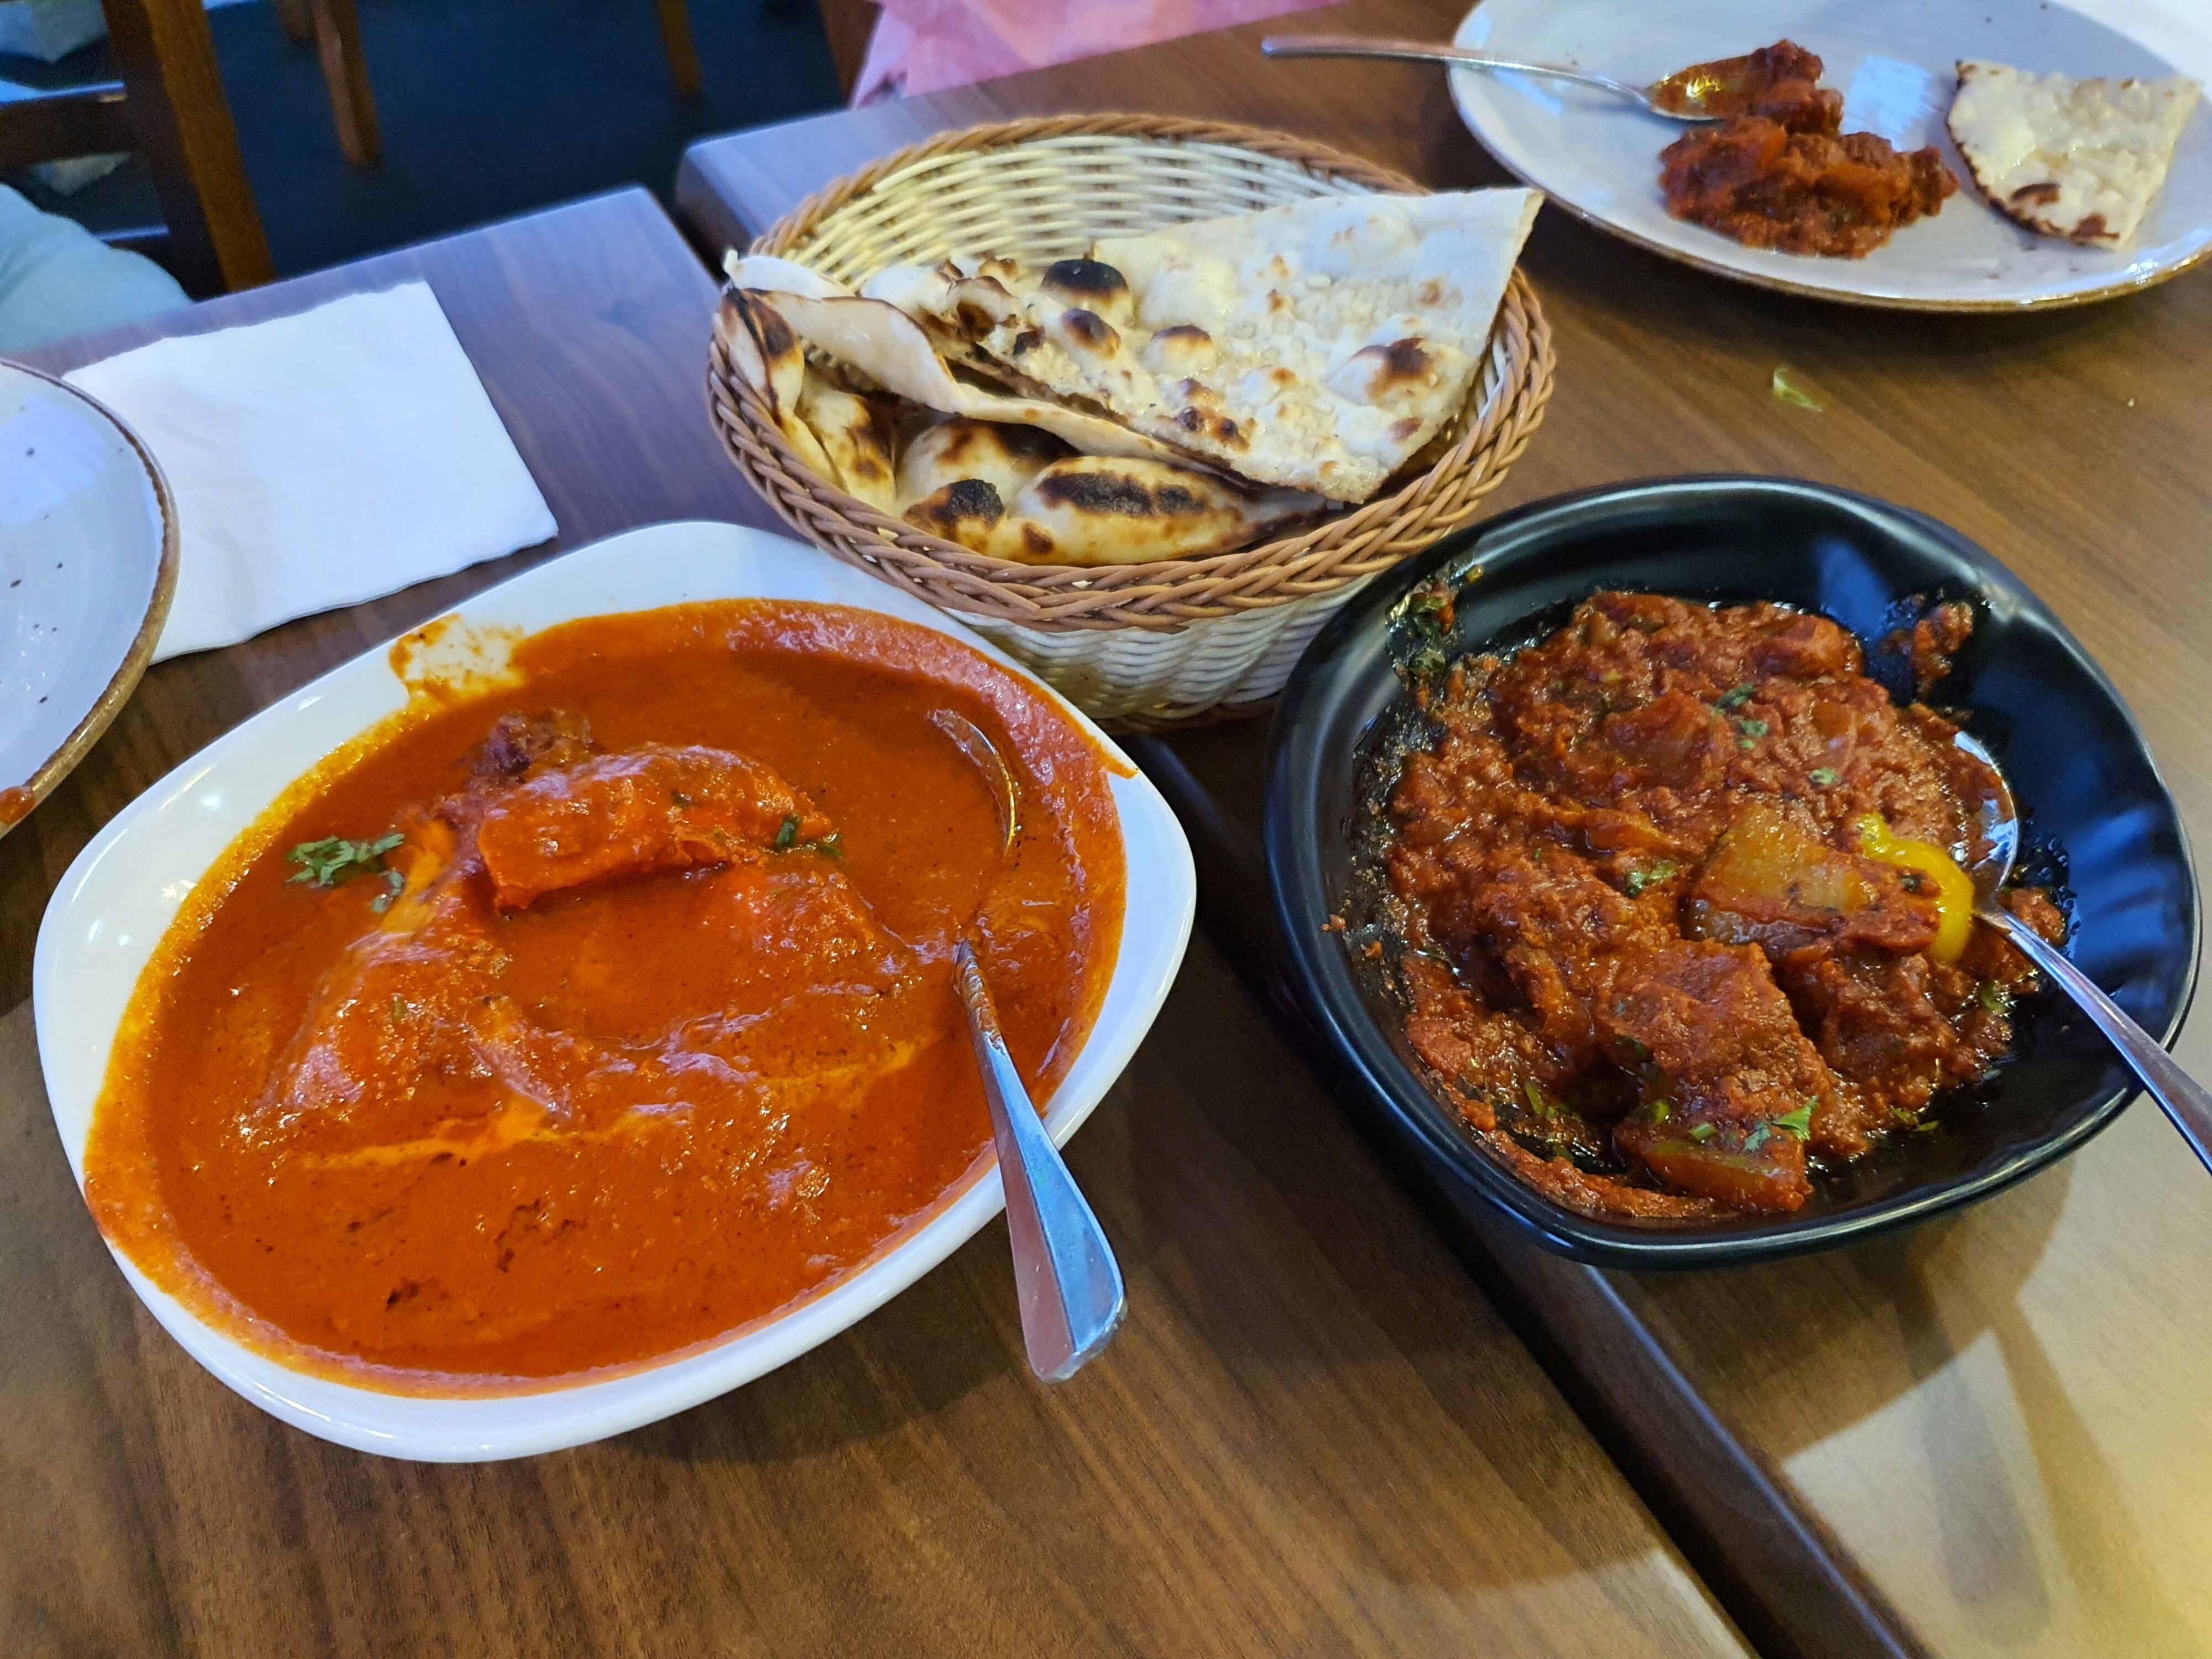 Photo of a dinner meal at Royal Indian Restaurant, Cambridge, Waikato, New Zealand.